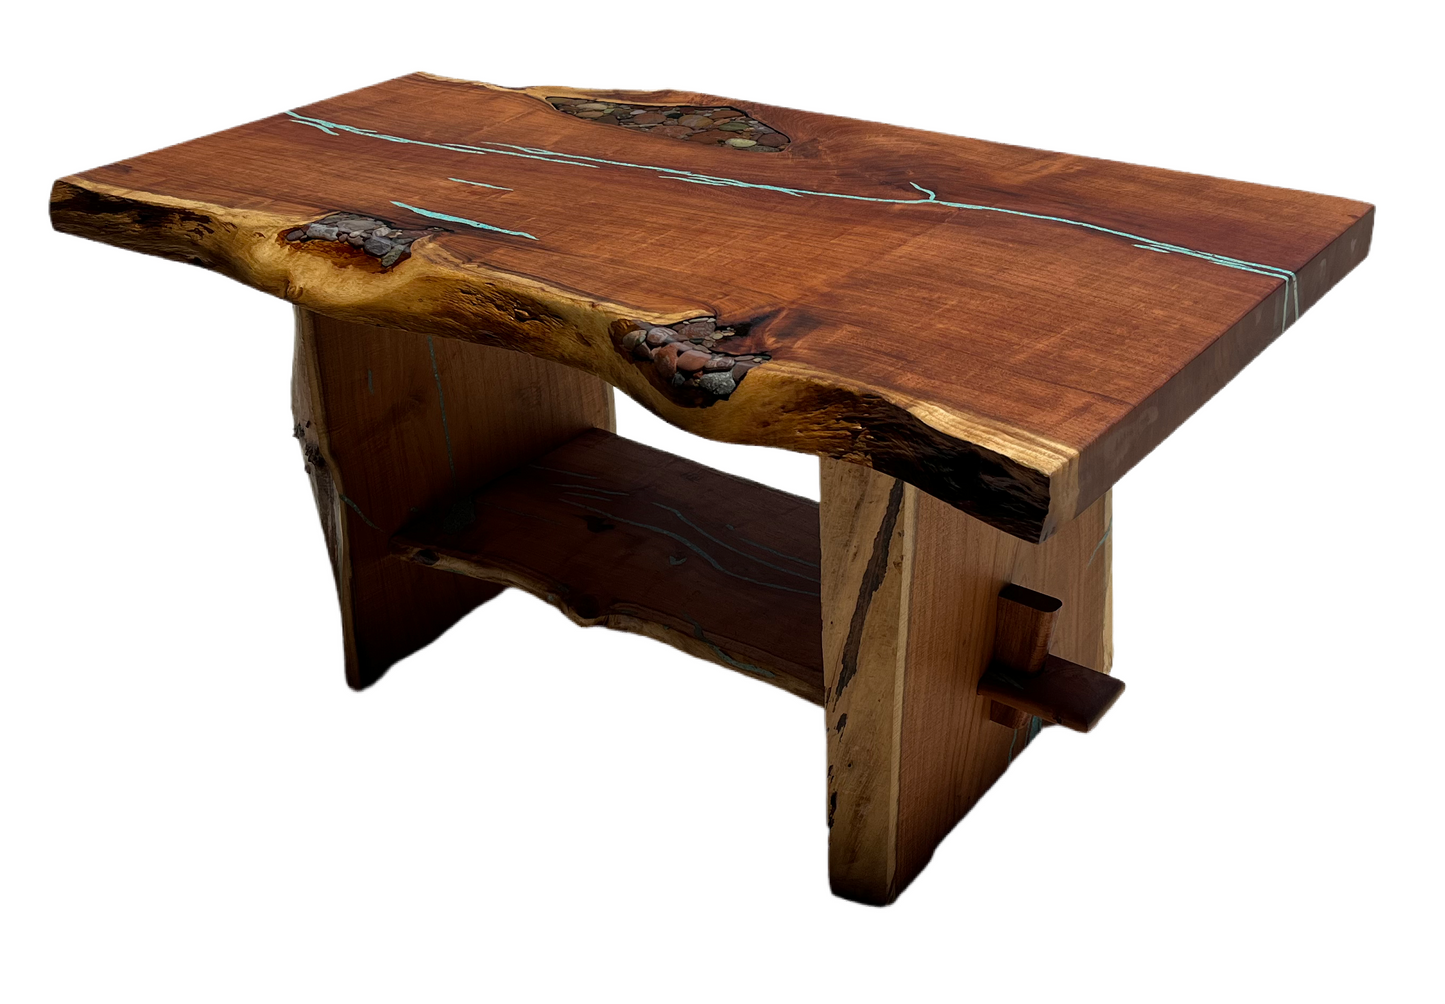 Natural Edge coffee table with inlay (combo river rock and turquoise)